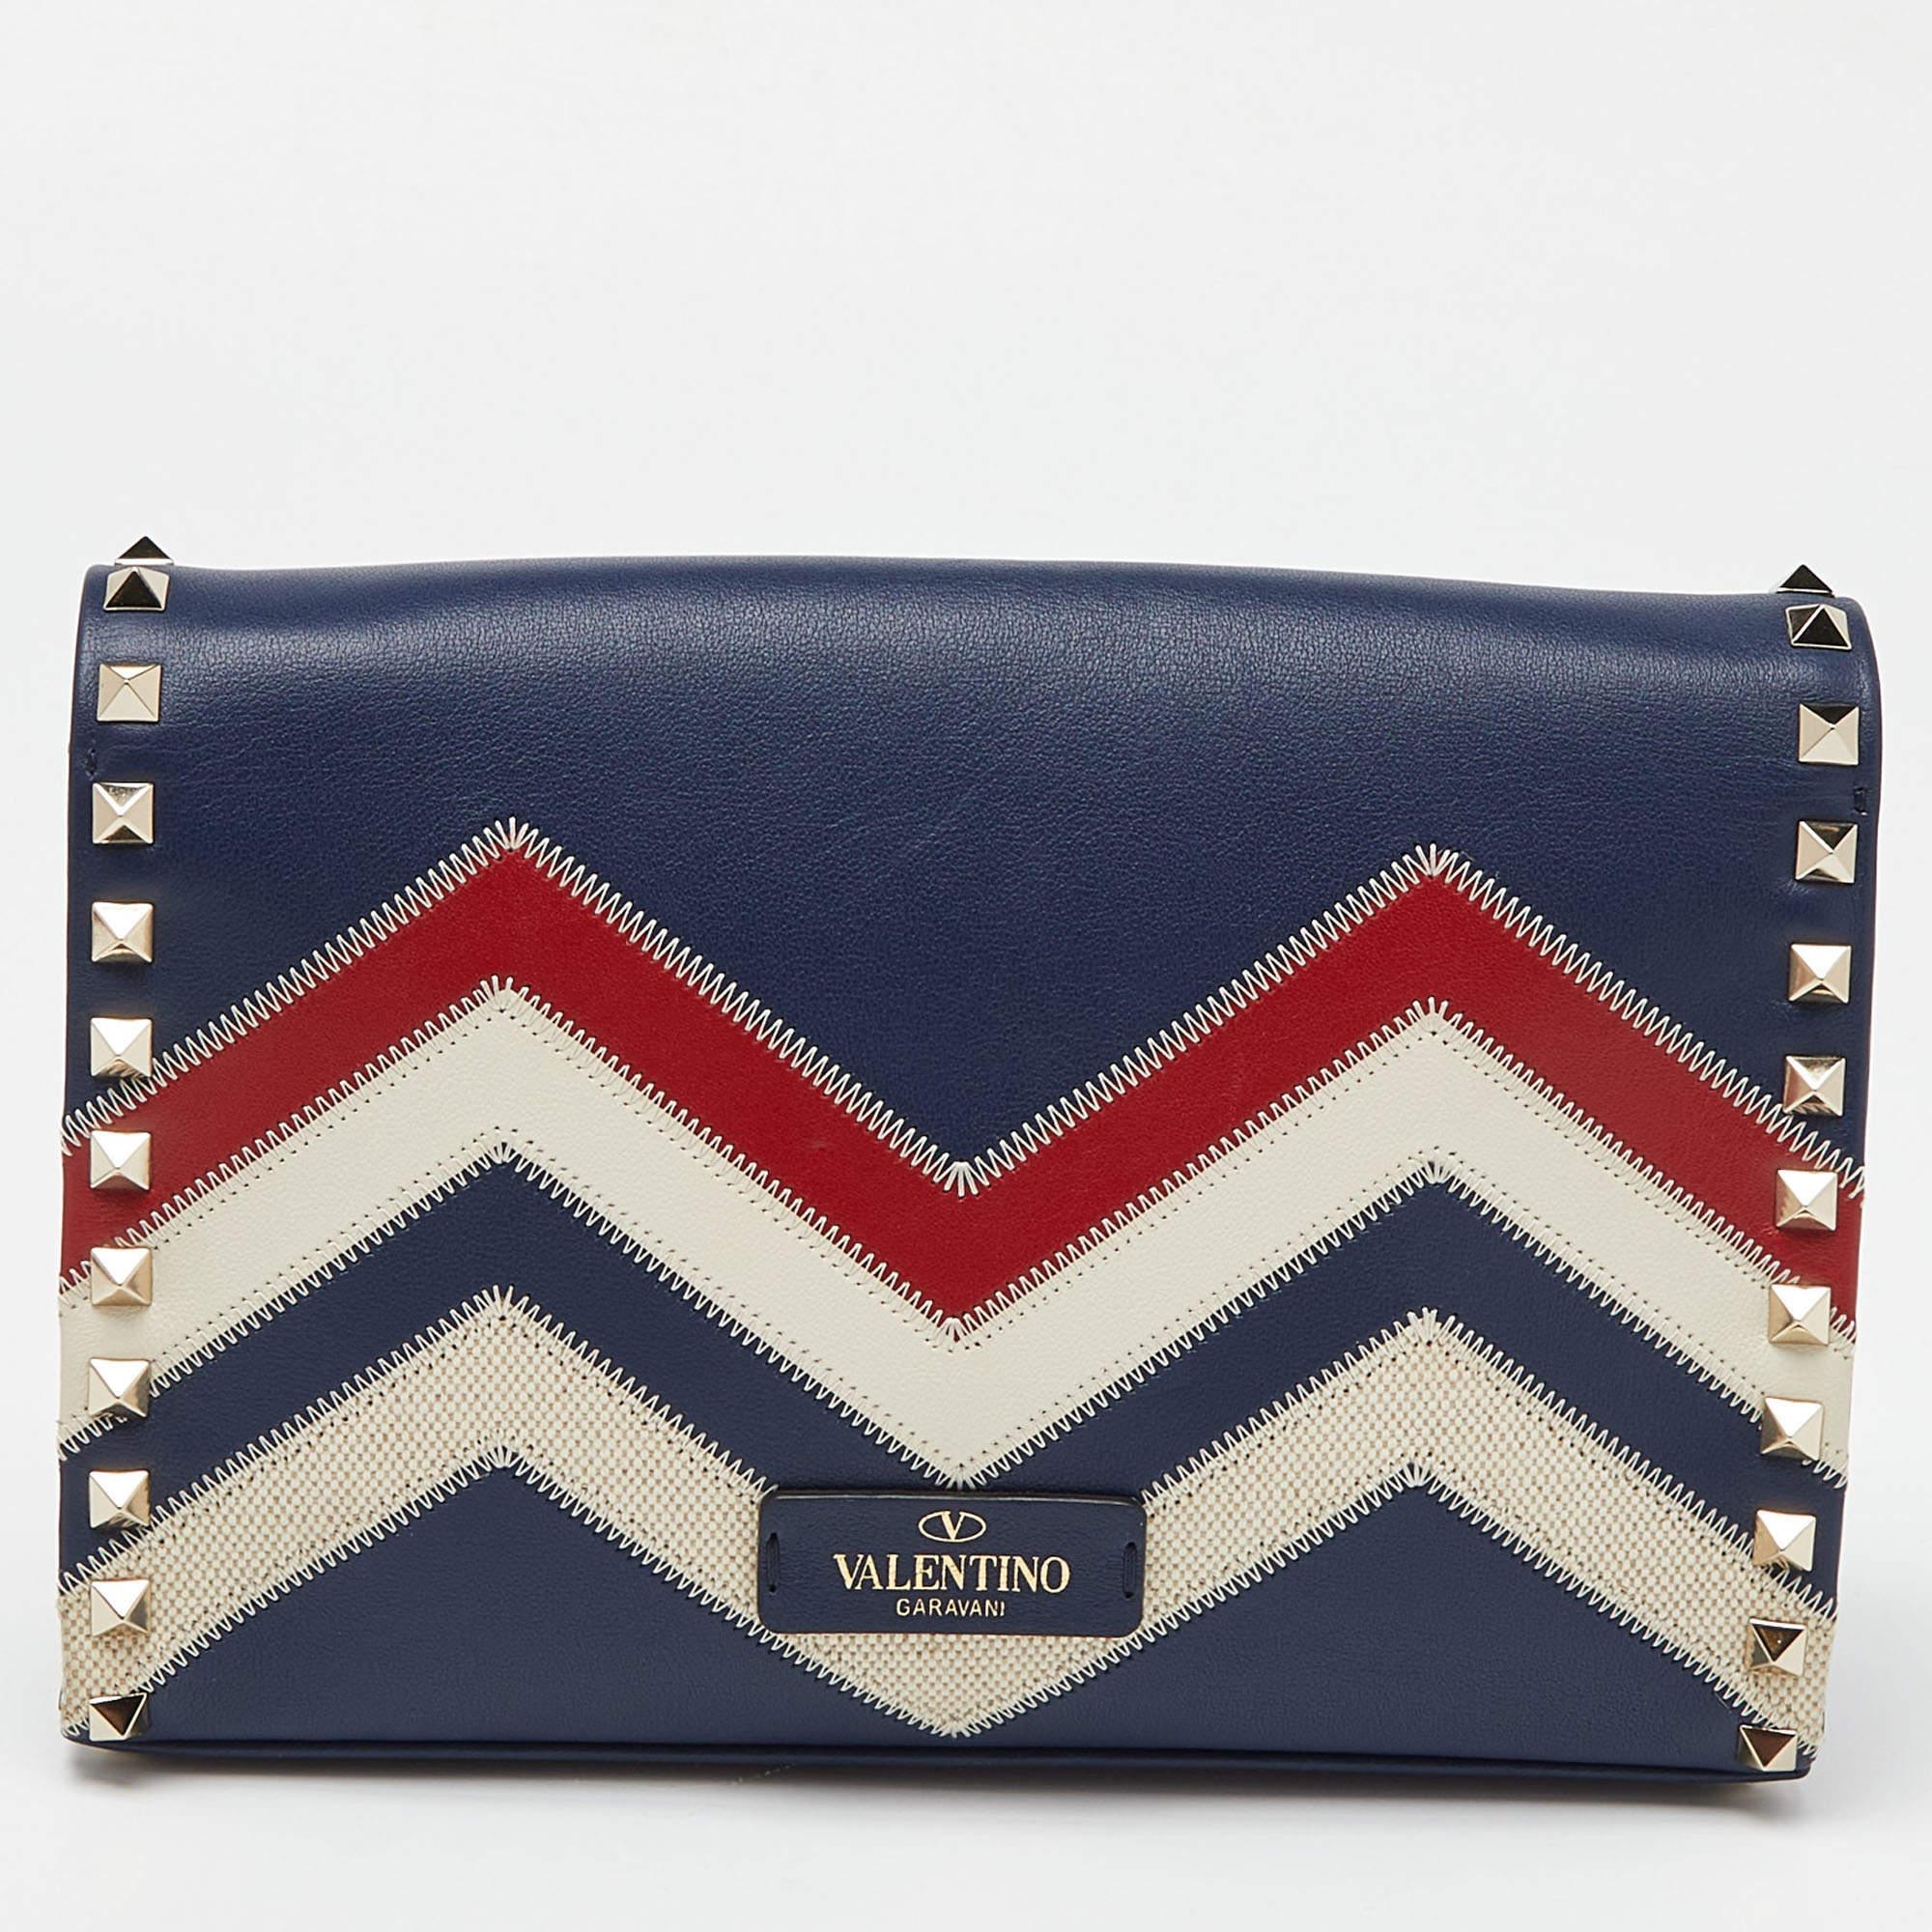 Ensure your day's essentials are in order and your outfit is complete with this Valentino crossbody bag. Crafted using the best materials, the bag carries the maison's signature of artful craftsmanship and enduring appeal.

Includes: Original Dustbag